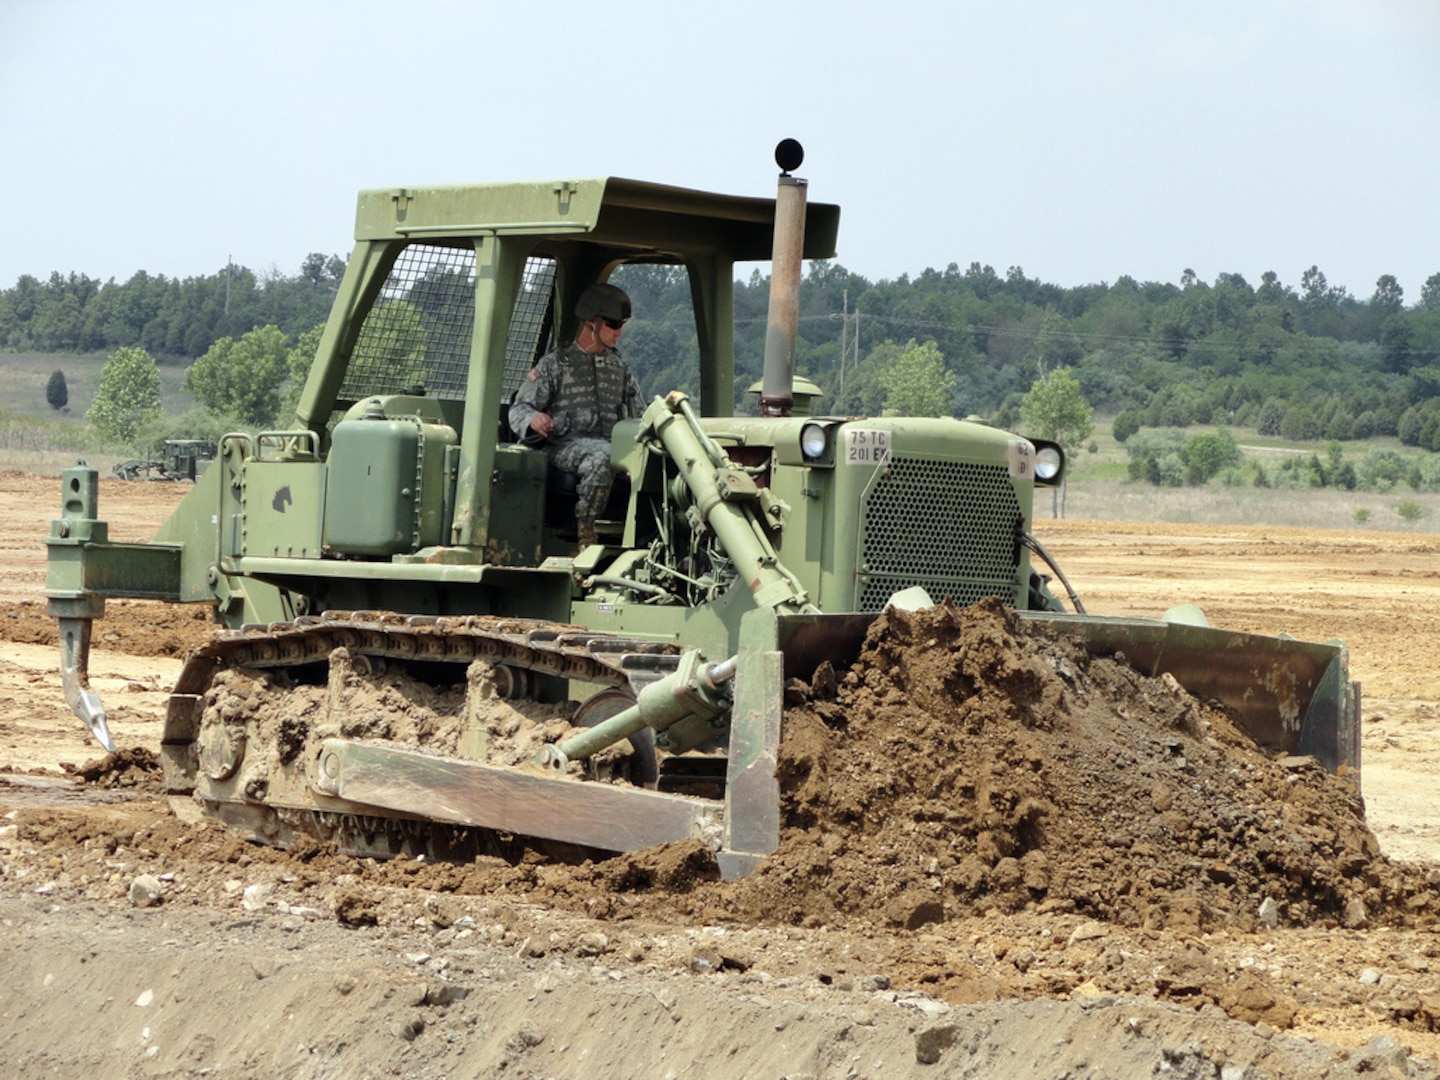 Spc. Donald Pace, of the 207th Horizontal Engineer Company, operates a D7 bulldozer to move dirt in efforts to build a new contingency operations location at Wendell H. Ford Regional Training Center in Greenville, Ky. Soldiers from the 201st and 206th Engineer Battalions worked on building living quarters, access roads and performed preliminary site surveys of a proposed air strip at the site.(U.S. Army Photo by Sgt. Sandra Fariss)